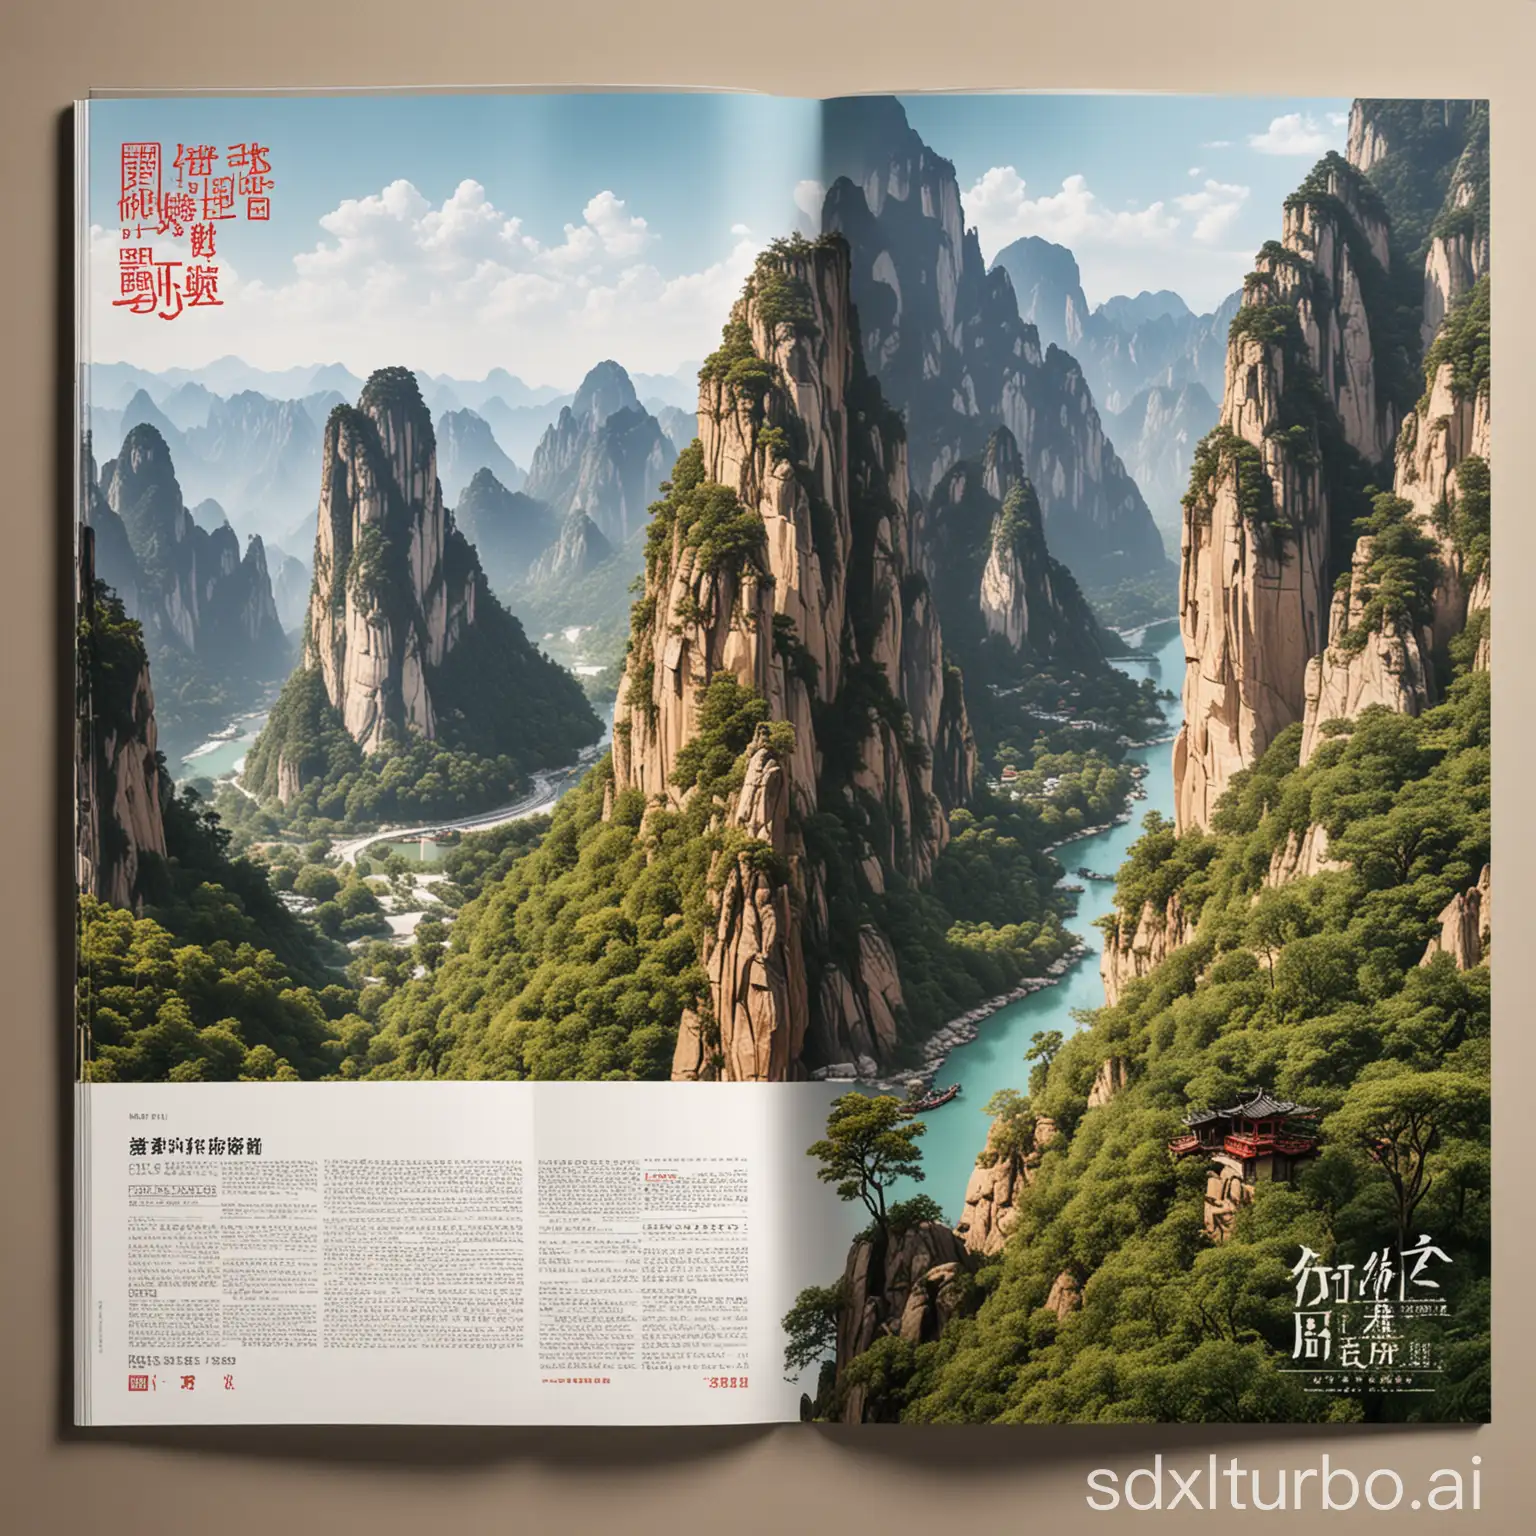 Huashan-Scenic-Spot-Captivating-Tourism-Attraction-Magazine-Cover